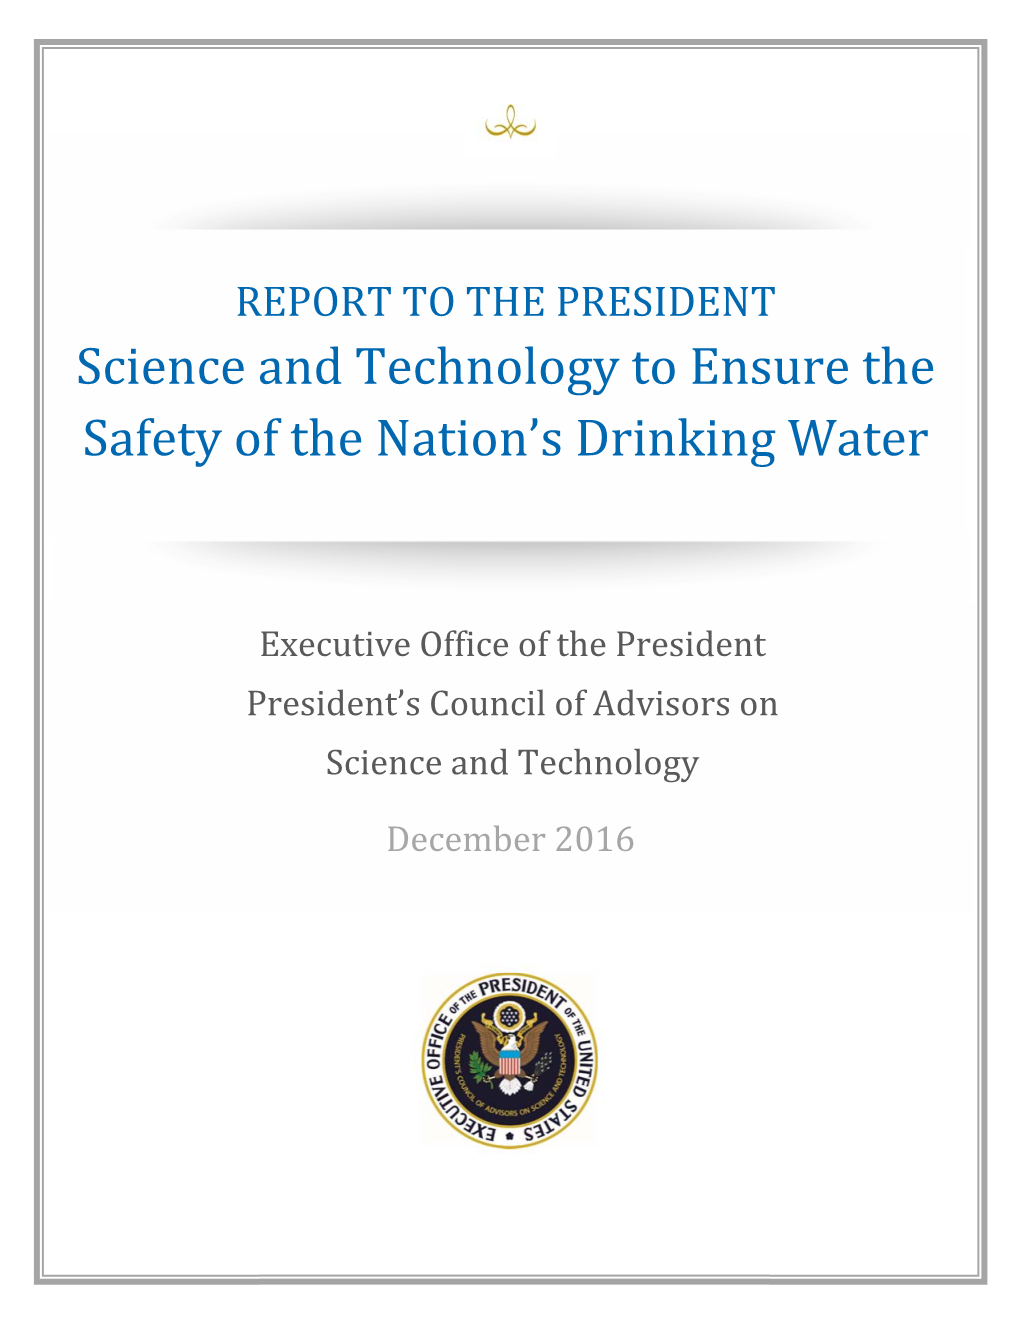 Science and Technology to Ensure the Safety of the Nation's Drinking Water